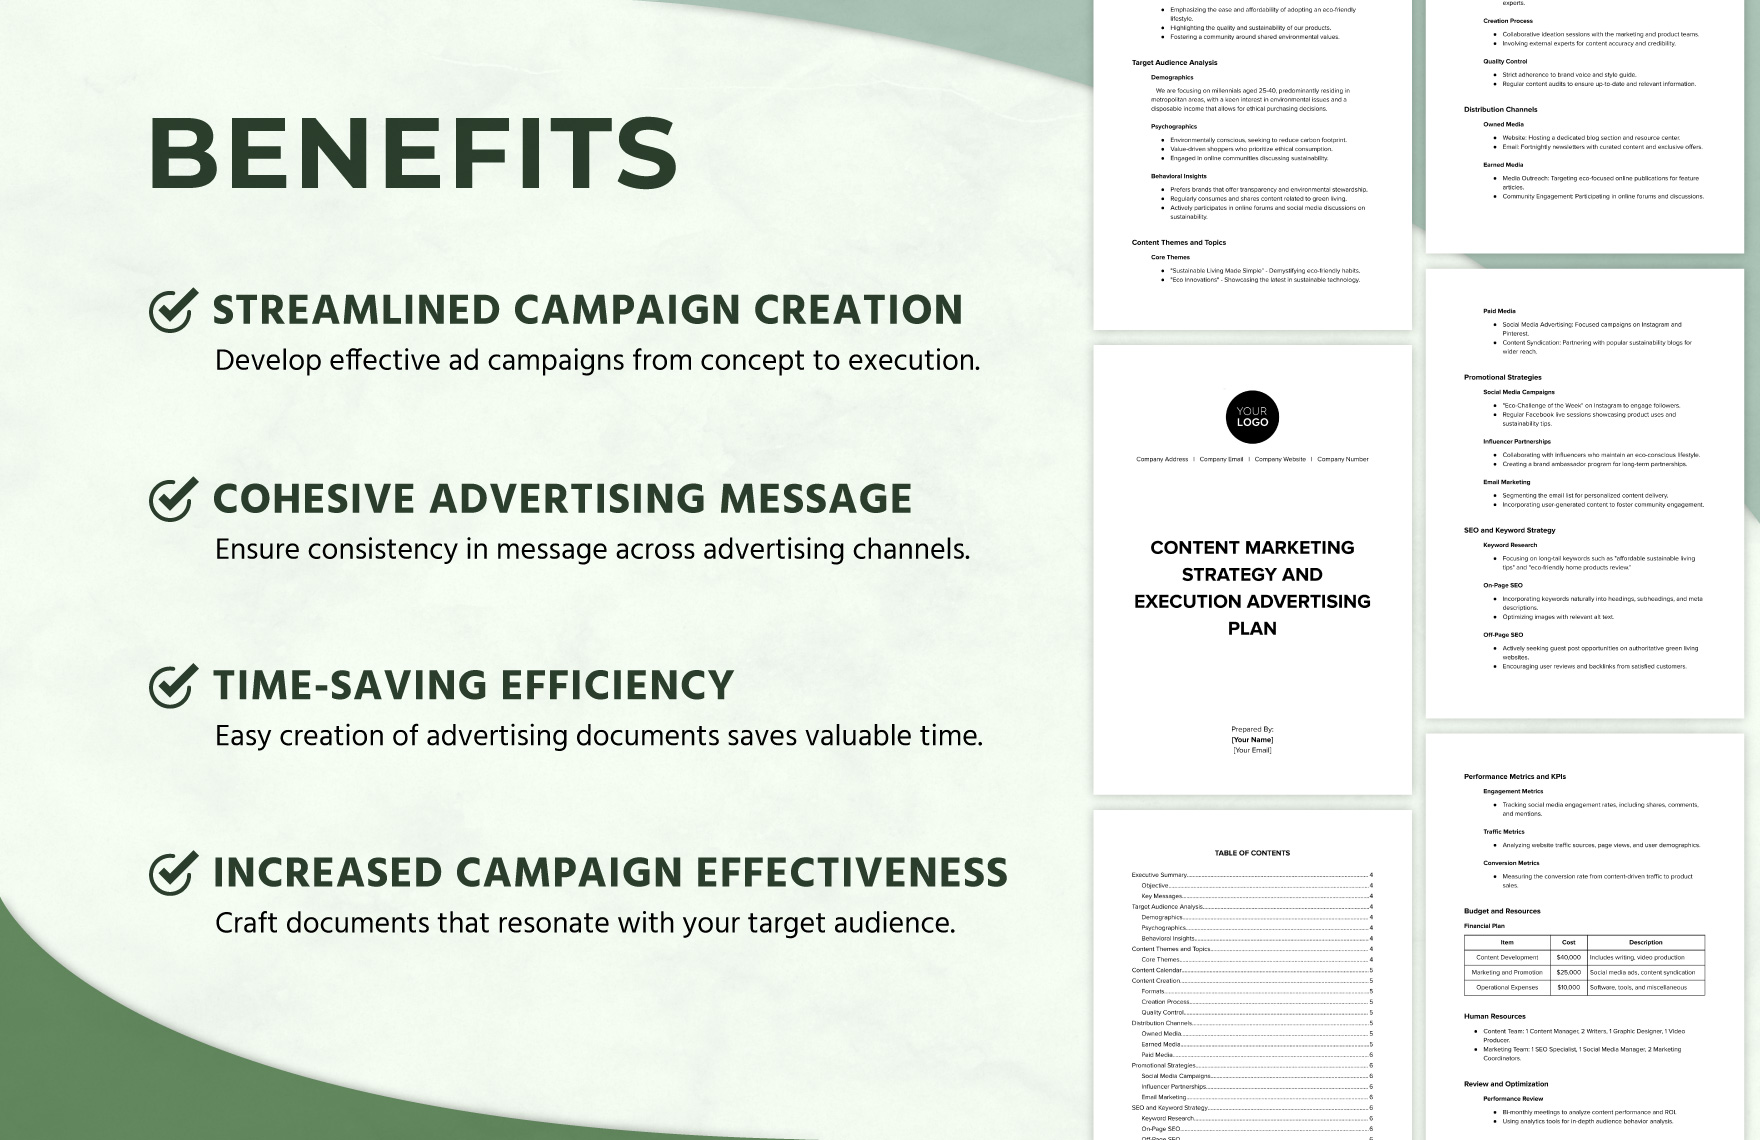 Content Marketing Strategy and Execution Advertising Plan Template